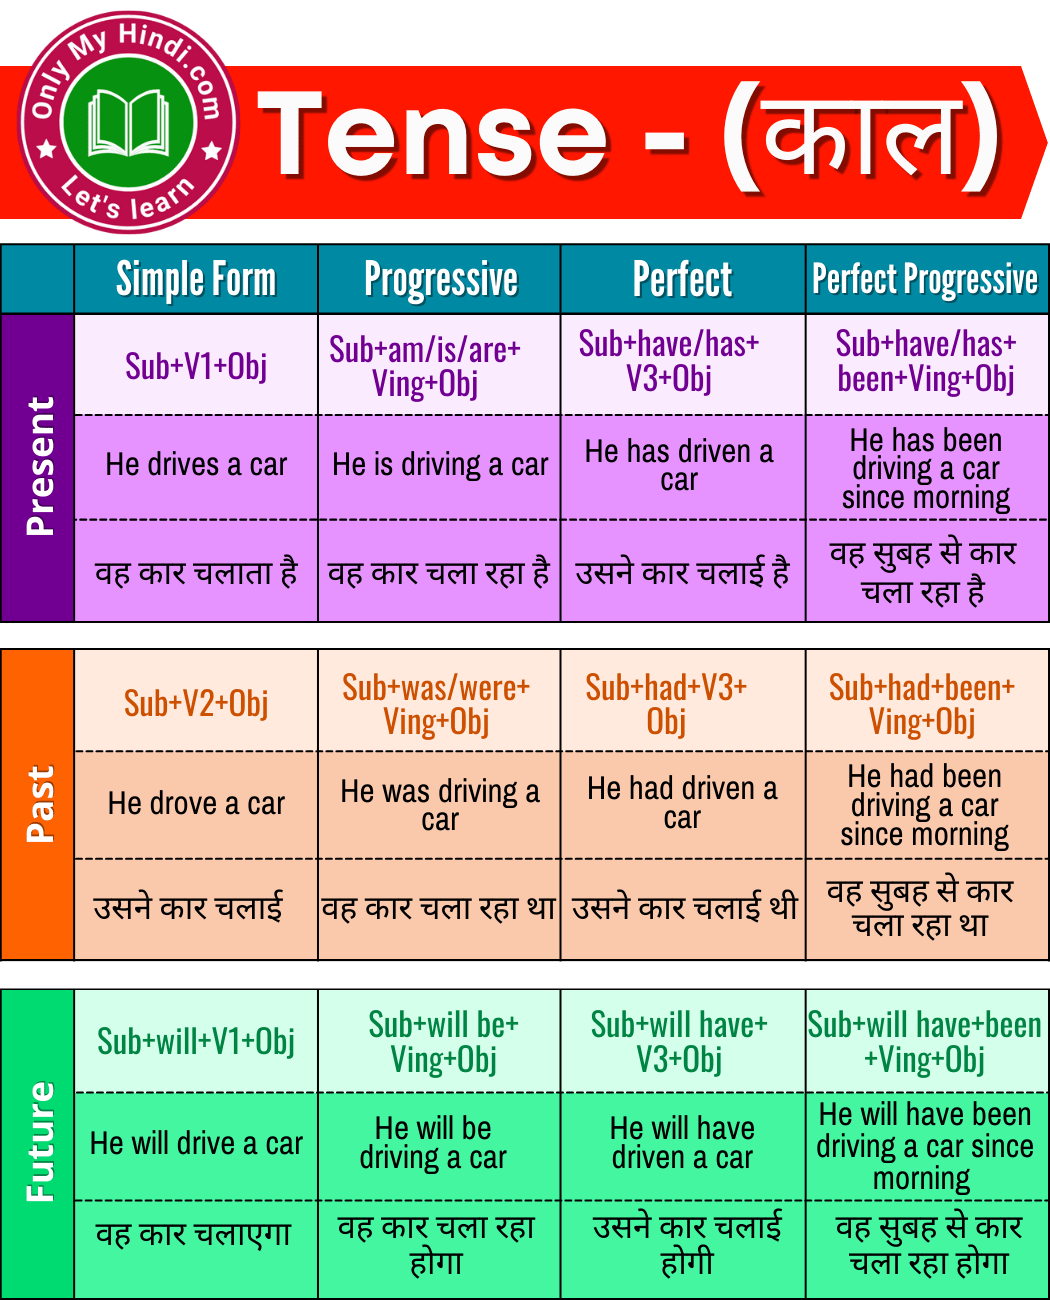 Tense in Hindi: Types of Tenses, Chart, Rules, Examples, & Formula